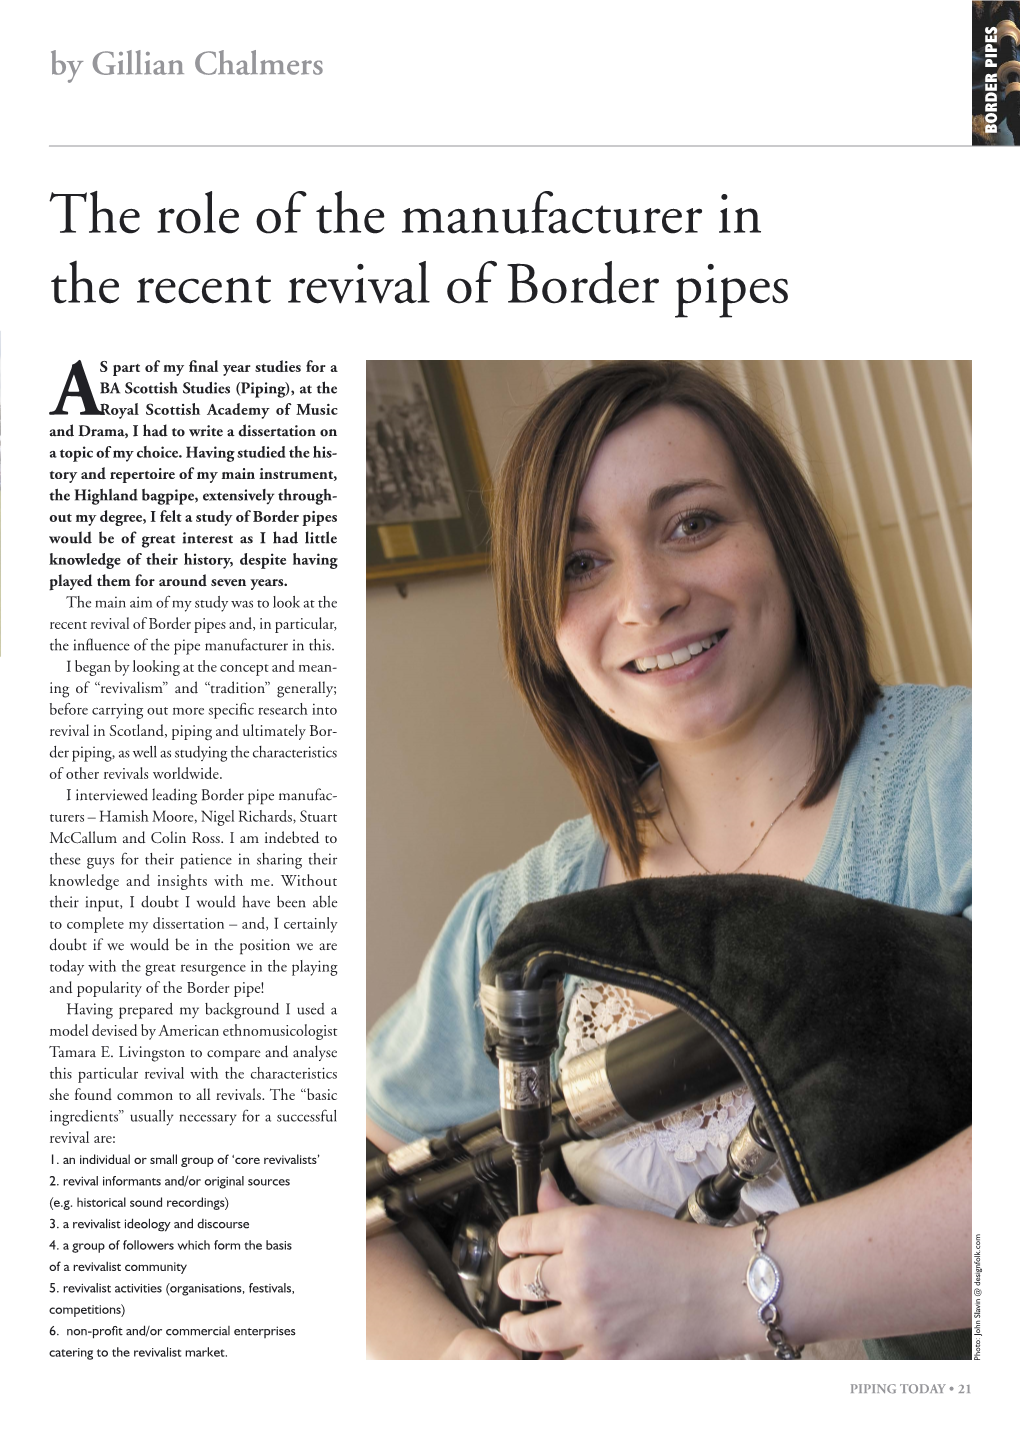 The Role of the Manufacturer in the Recent Revival of Border Pipes